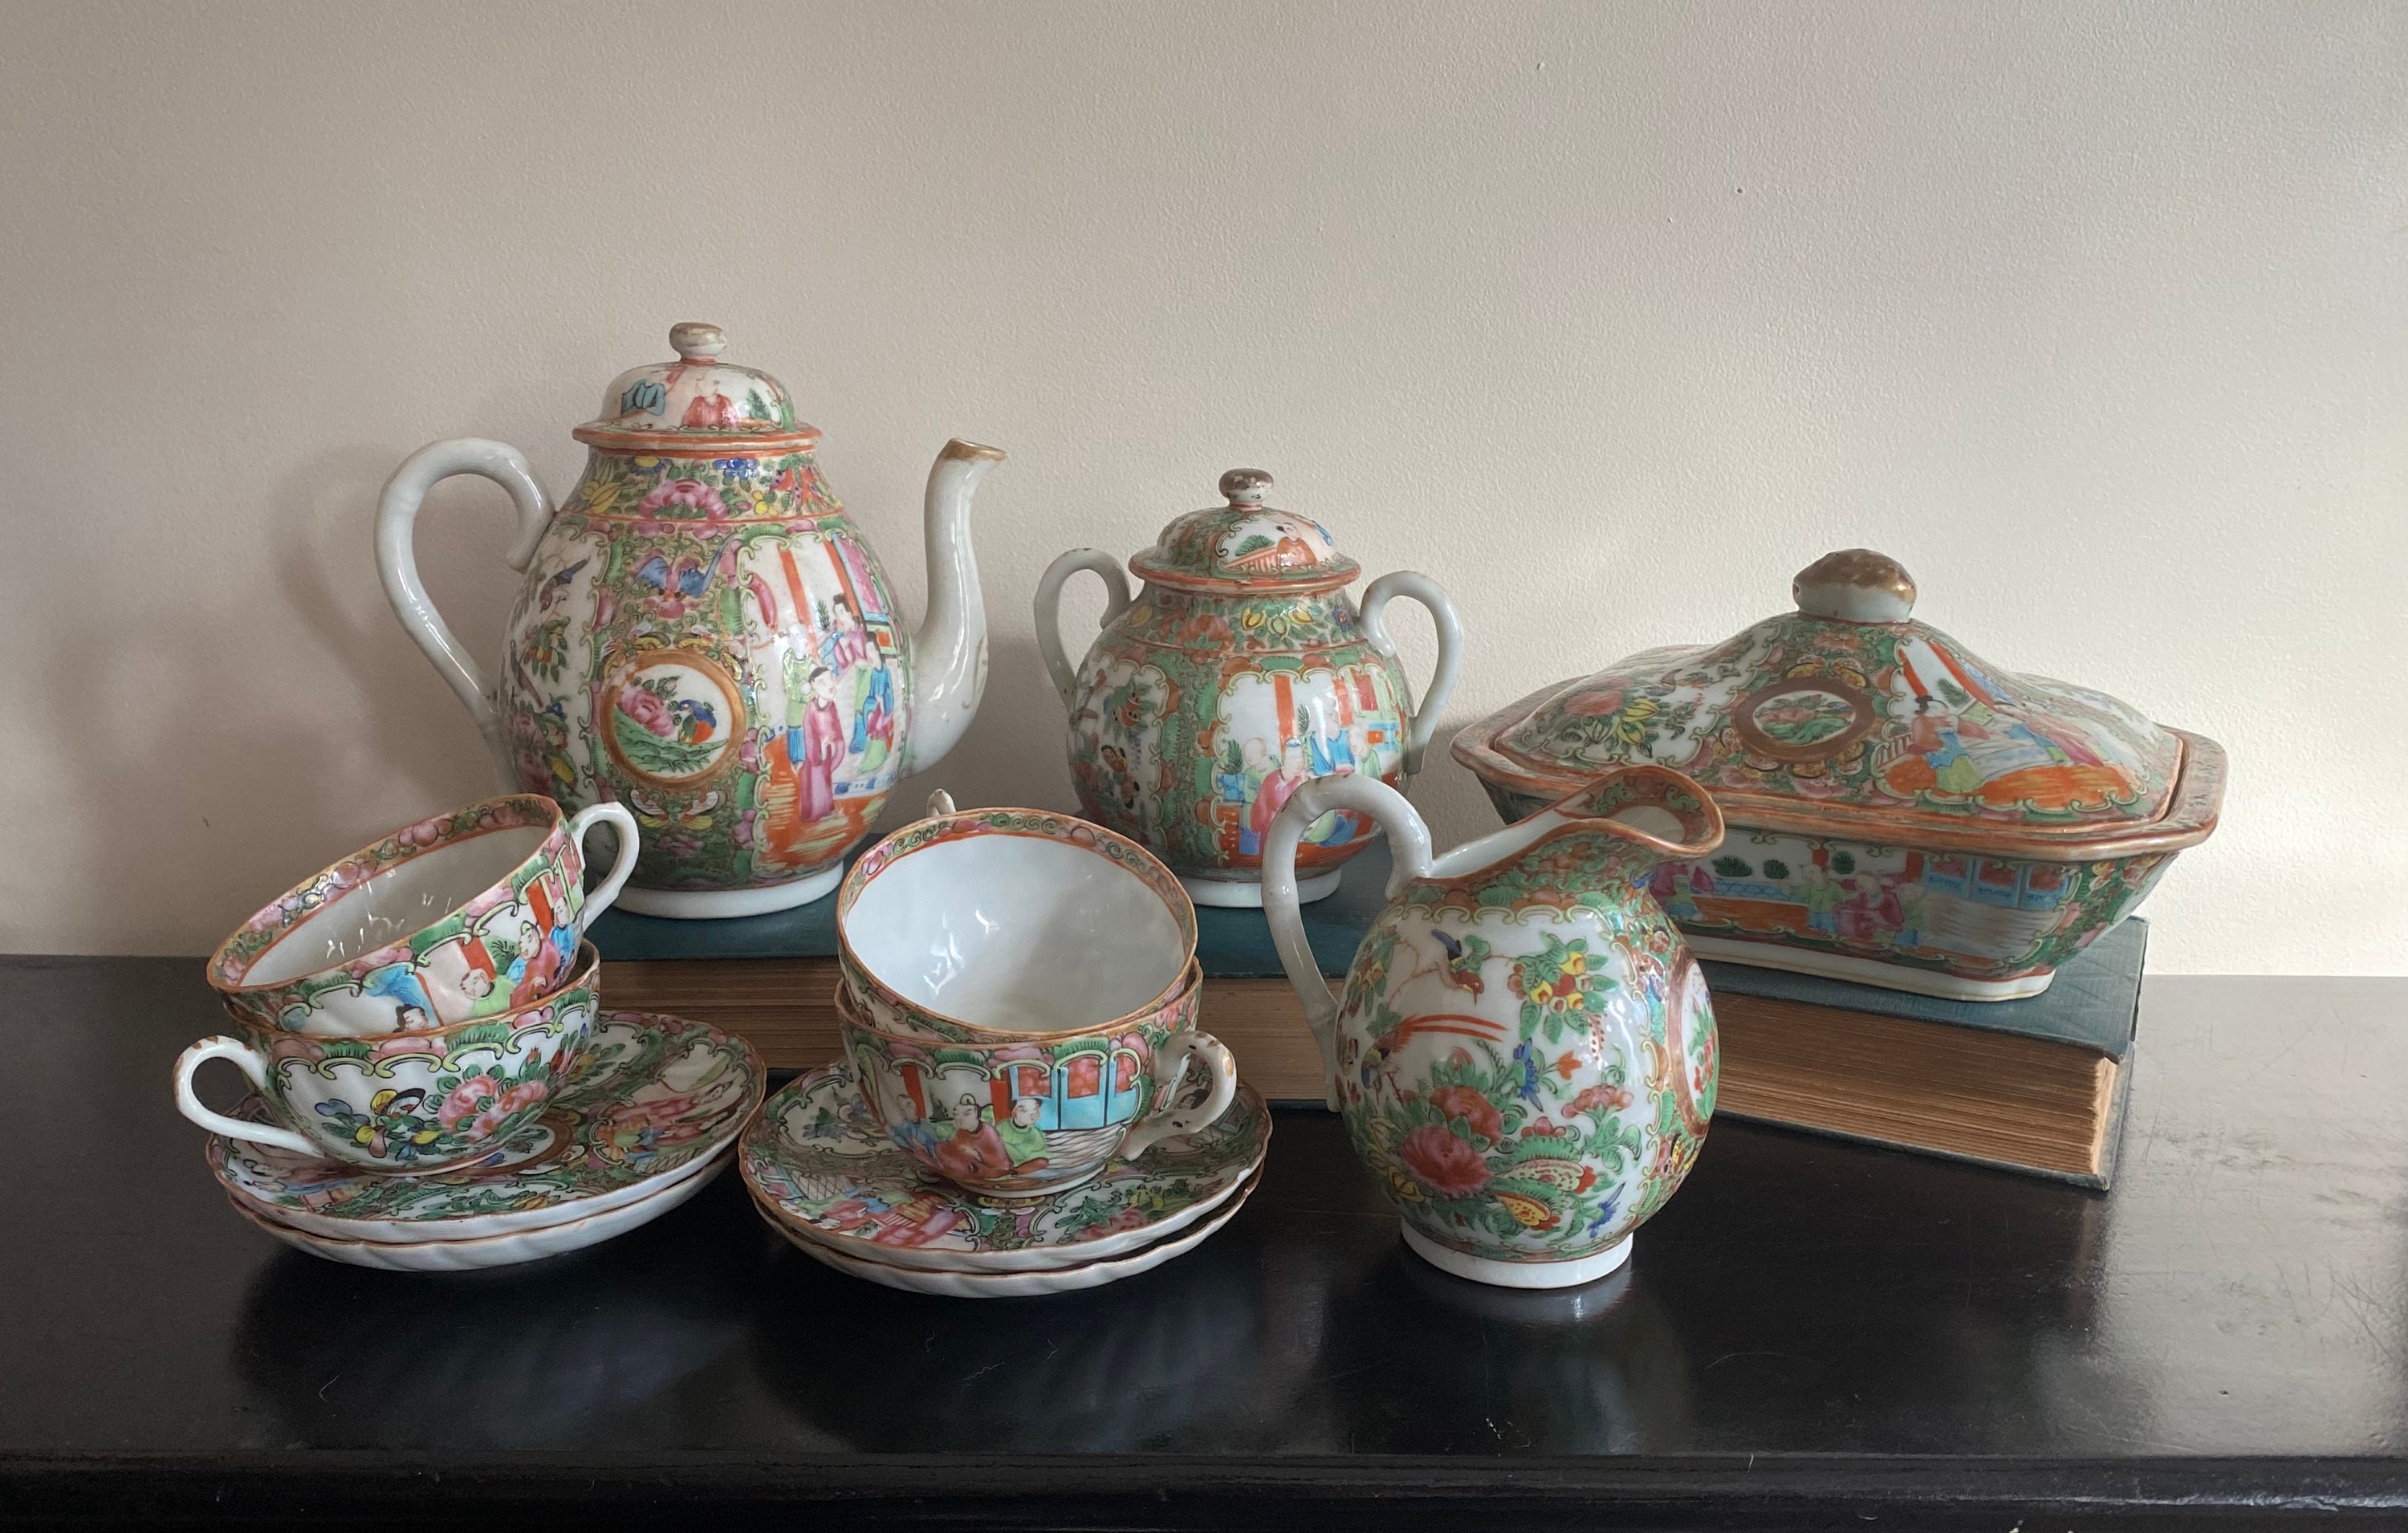 Chicken Gongfu Tea Set, Antique Style: Teapot, Cups, Pitcher & Filter